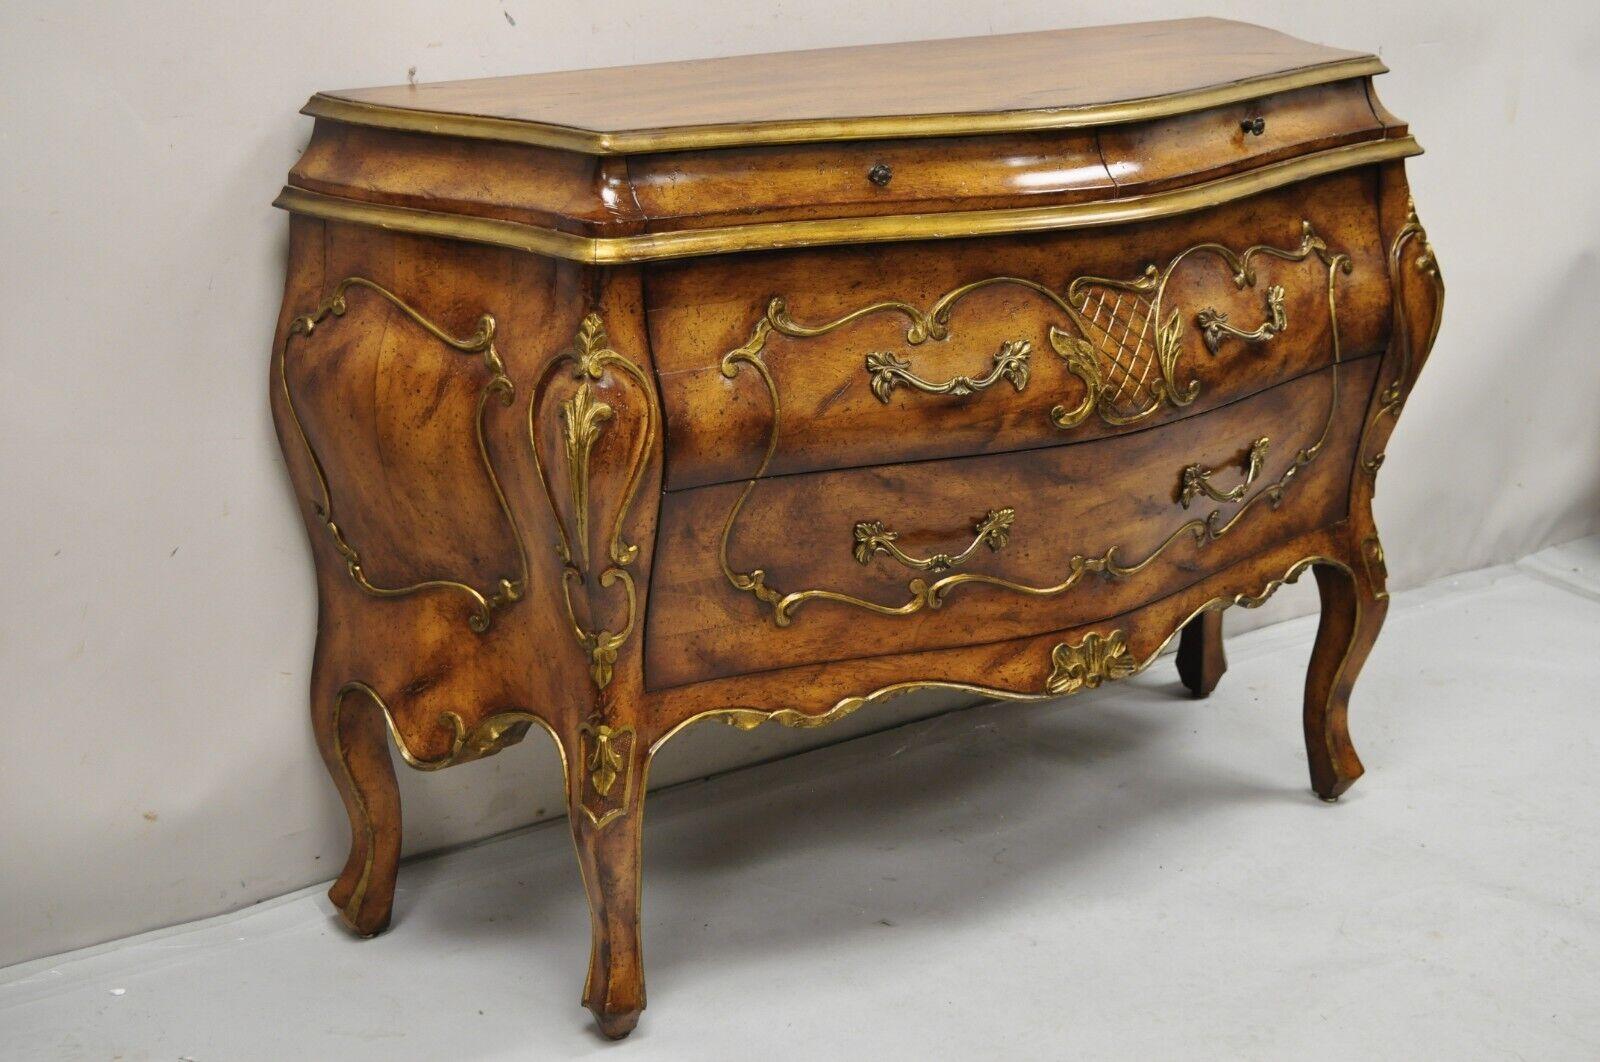 Vintage French Rococo Style Italian Bombe 4 Drawer Commode Chest Dresser. Item features 